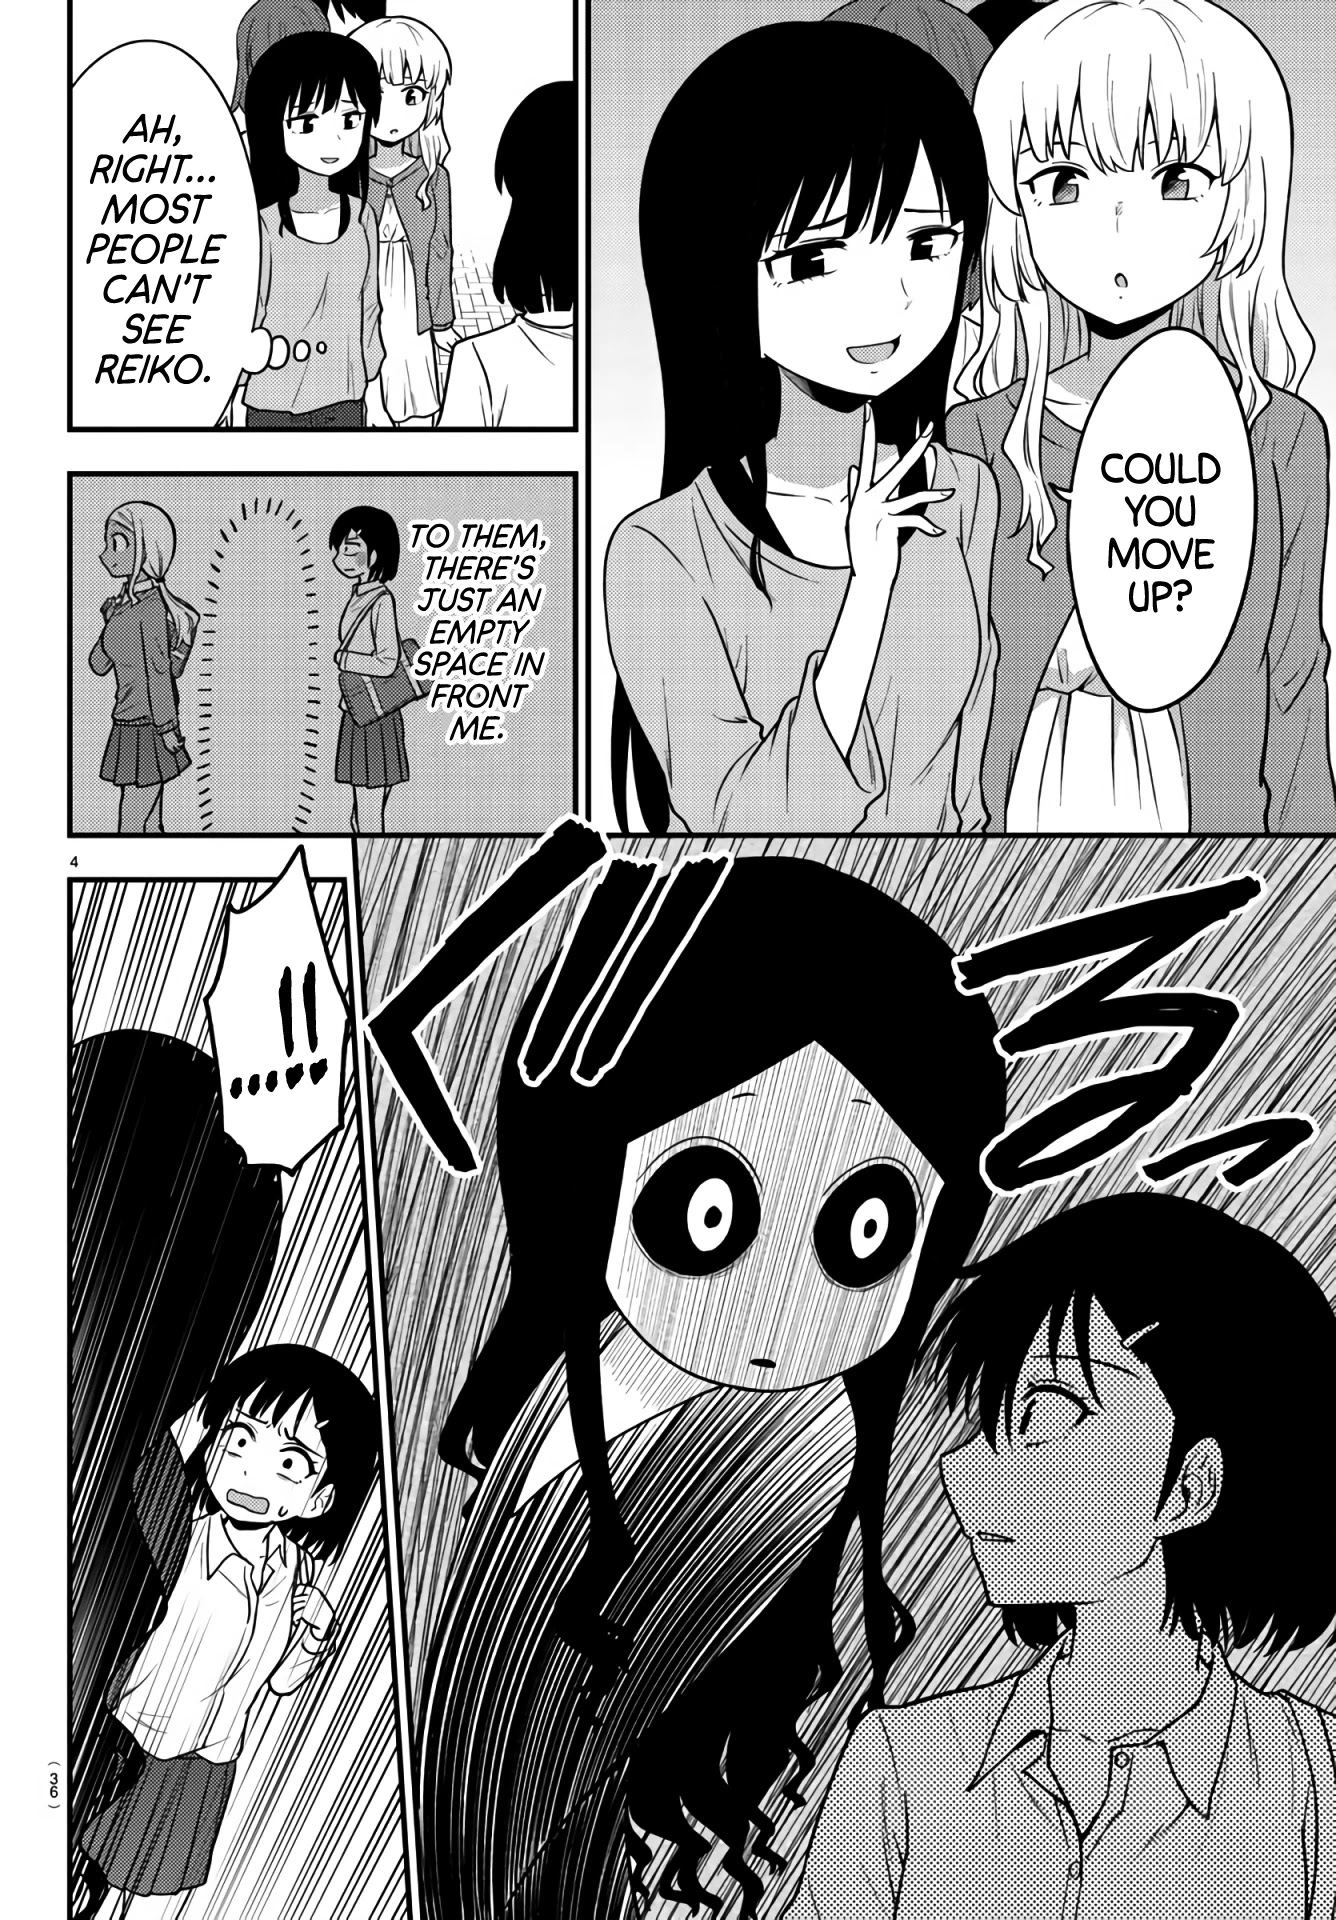 There's A Ghost Behind That Gyaru - chapter 2 - #4